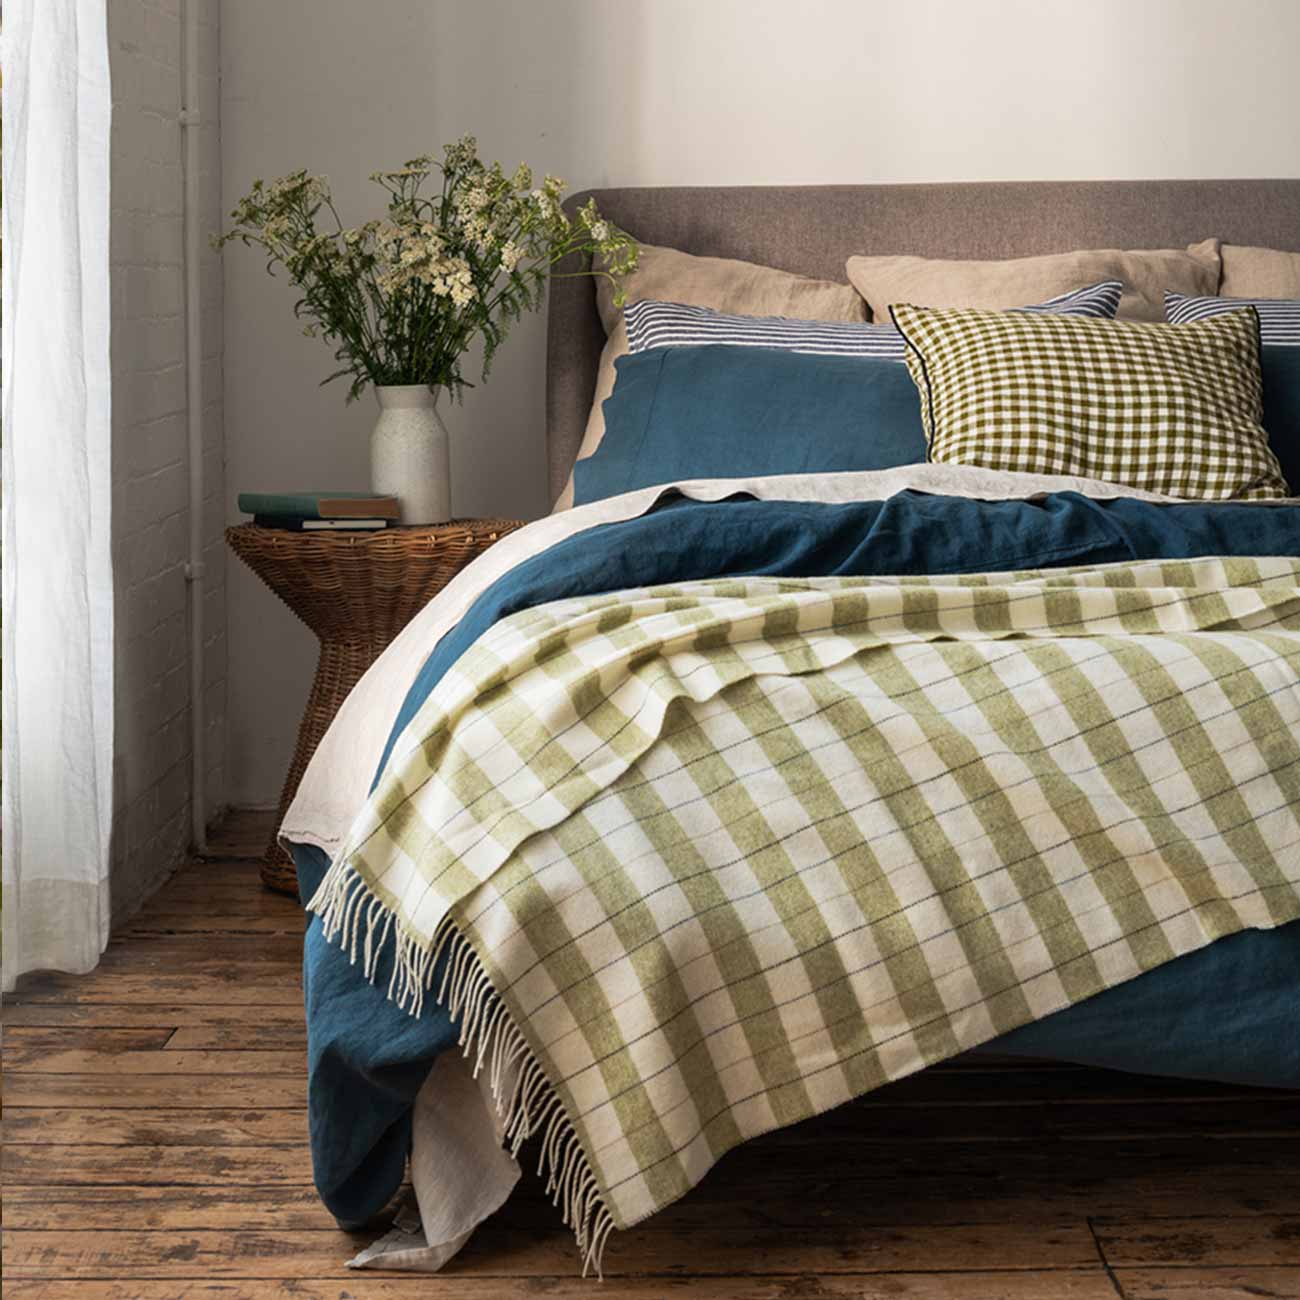 Apple Checked Stripe Wool Blanket, Deep Teal Duvet Cover and Pillowcases, Oatmeal Flat Sheet, Midnight Stripe Pillowcases